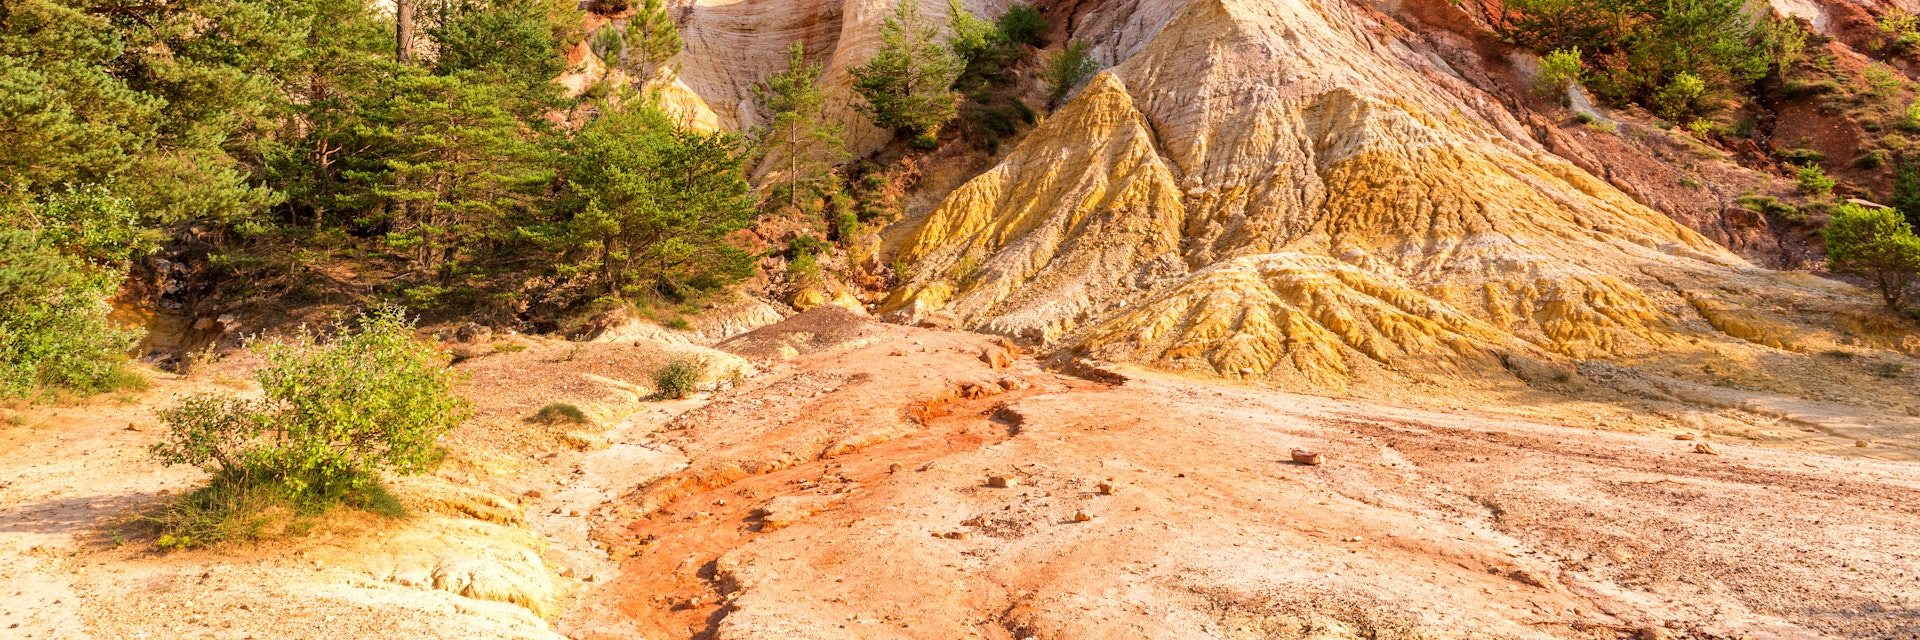 The red rock formations at Colorado Provencal in France.